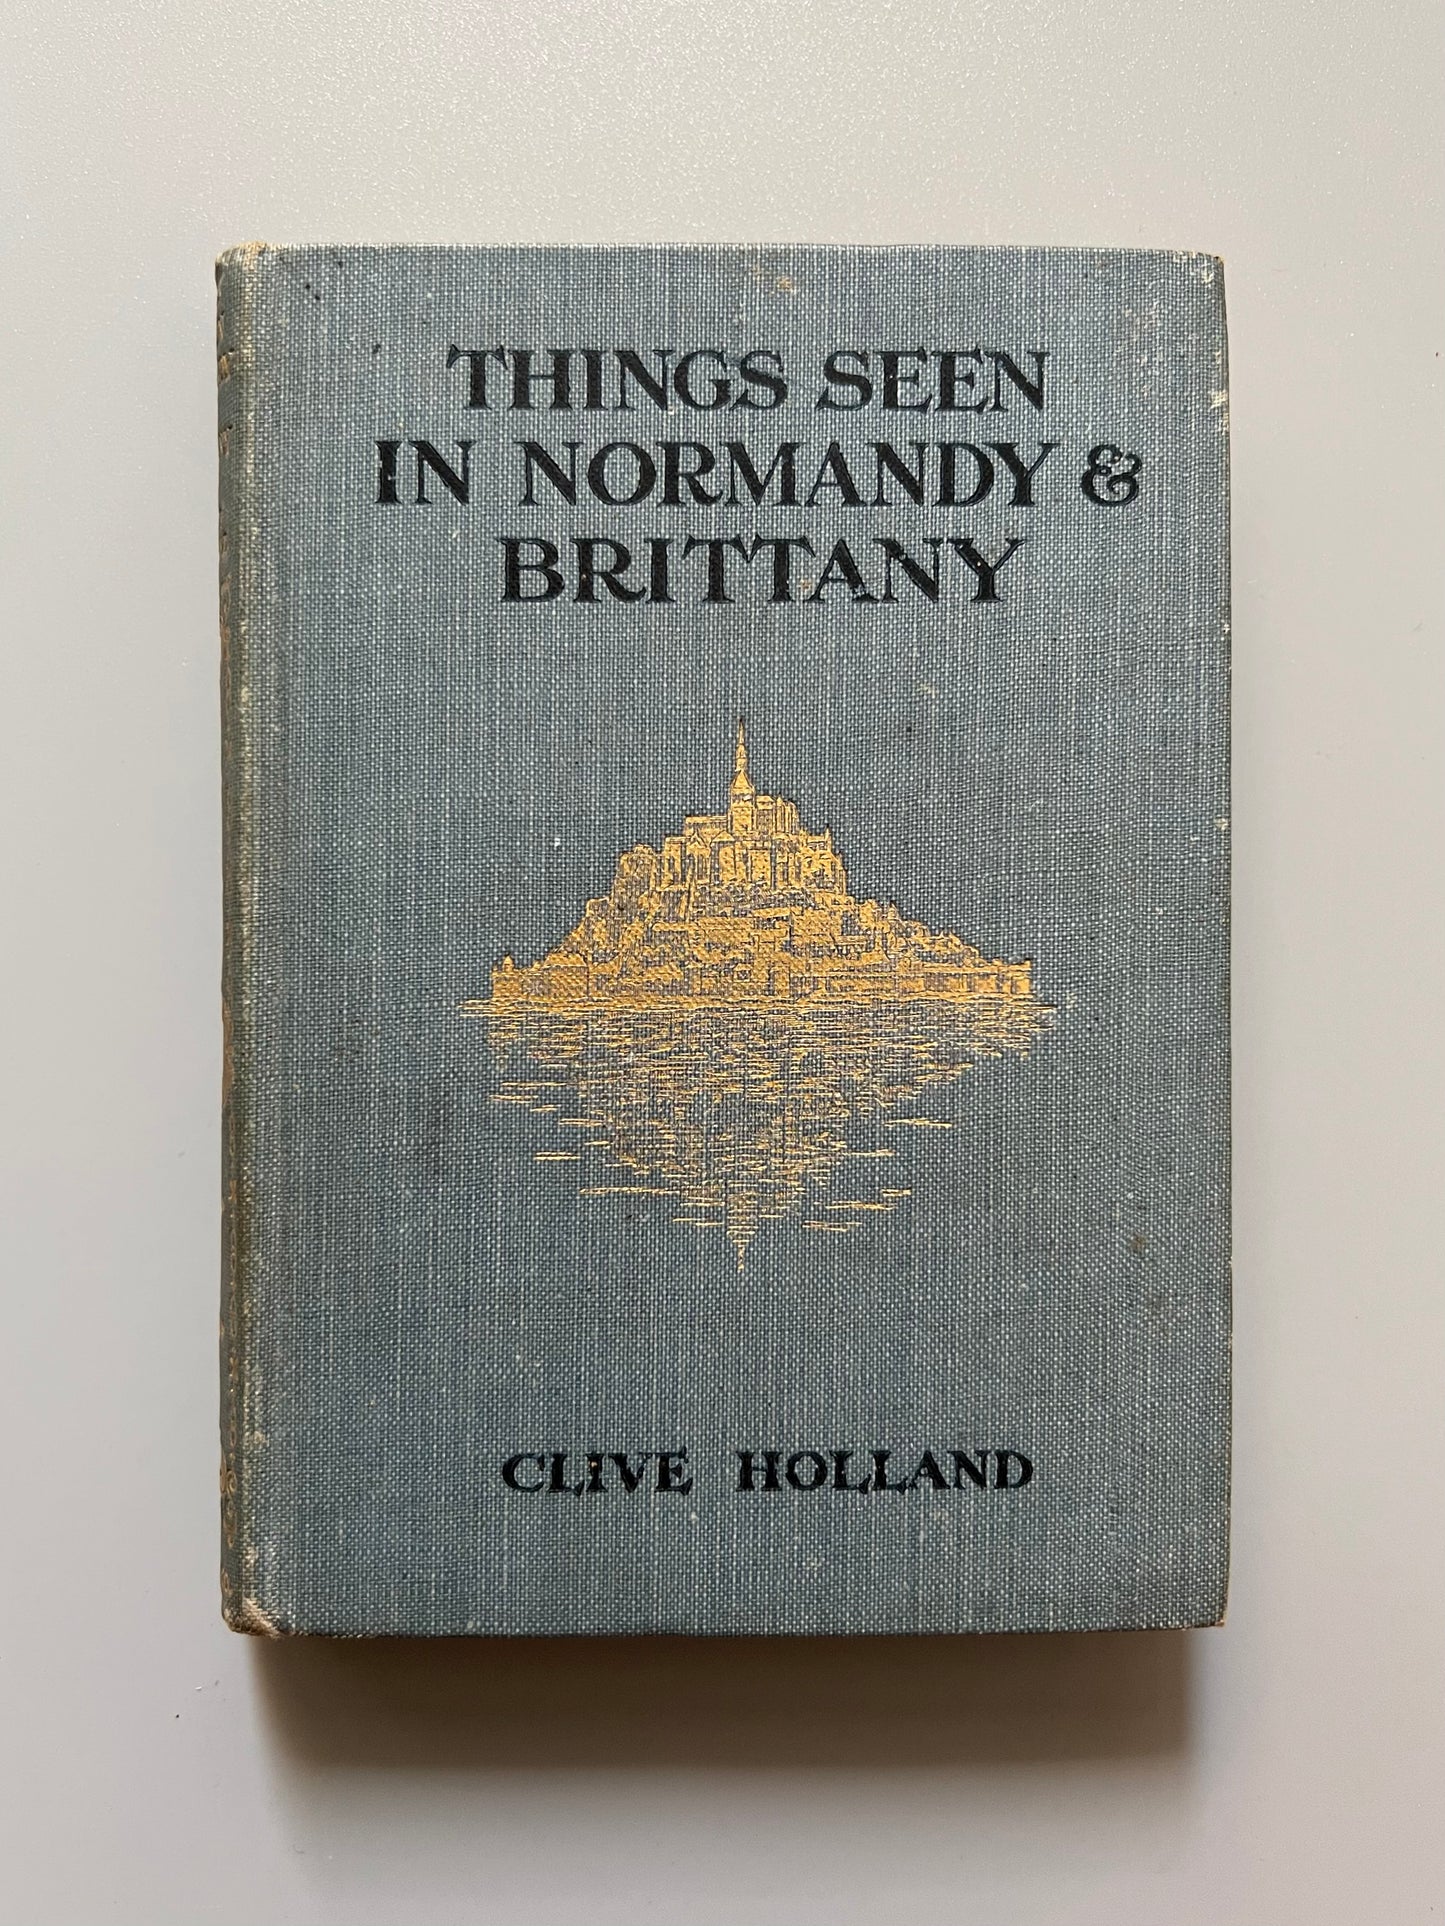 Things seen in Normandy & Brittany, Clive Holland - Seeley, Service and Cº limited, 1925